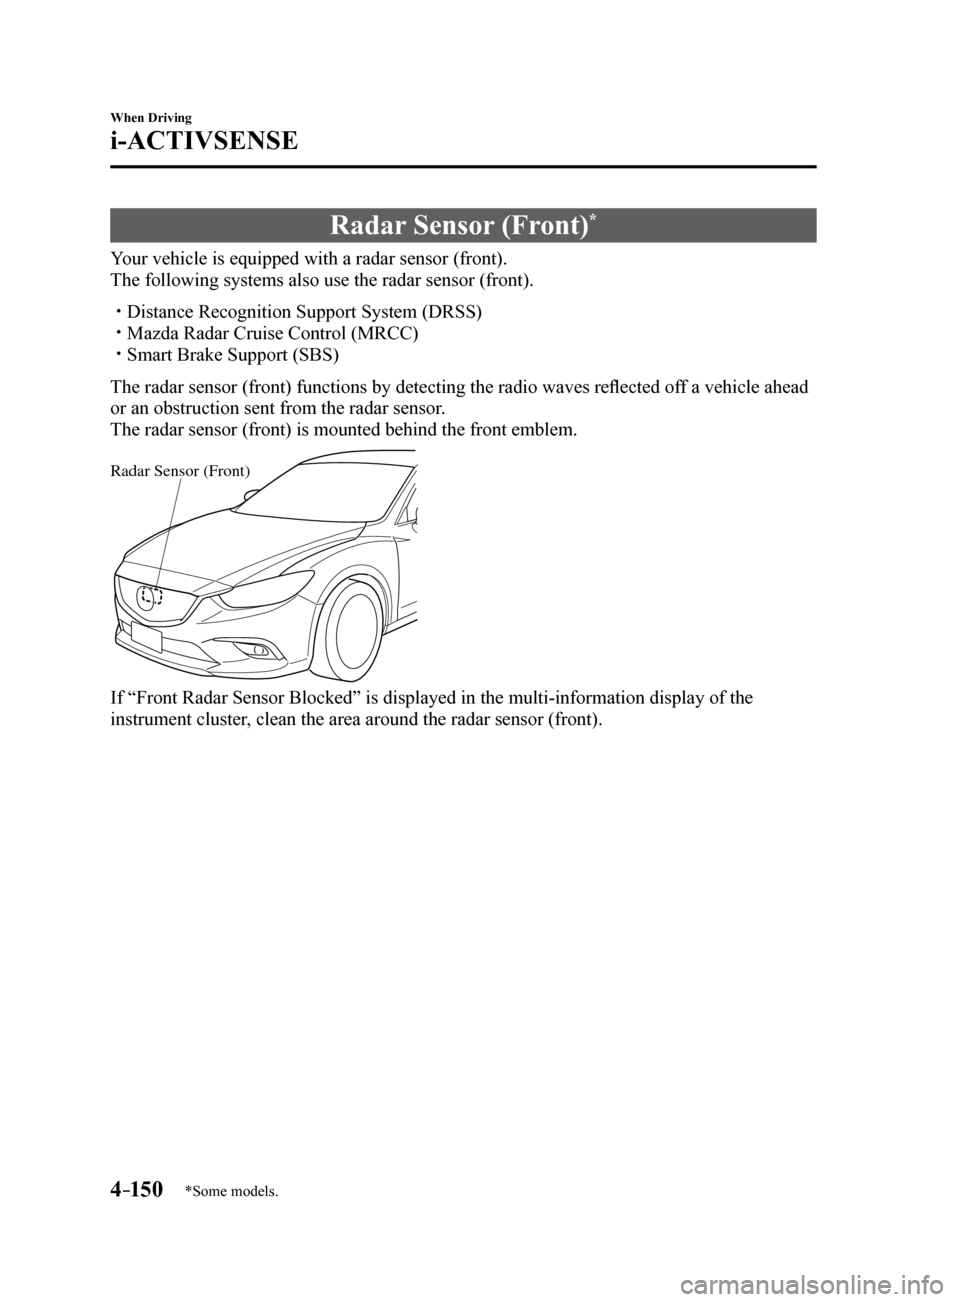 MAZDA MODEL 6 2017   (in English) User Guide 4–150
When Driving
i-ACTIVSENSE
*Some models.
Radar Sensor (Front)*
Your vehicle is equipped with a radar sensor (front).
The following systems also use the radar sensor (front).
 Distance Recogn